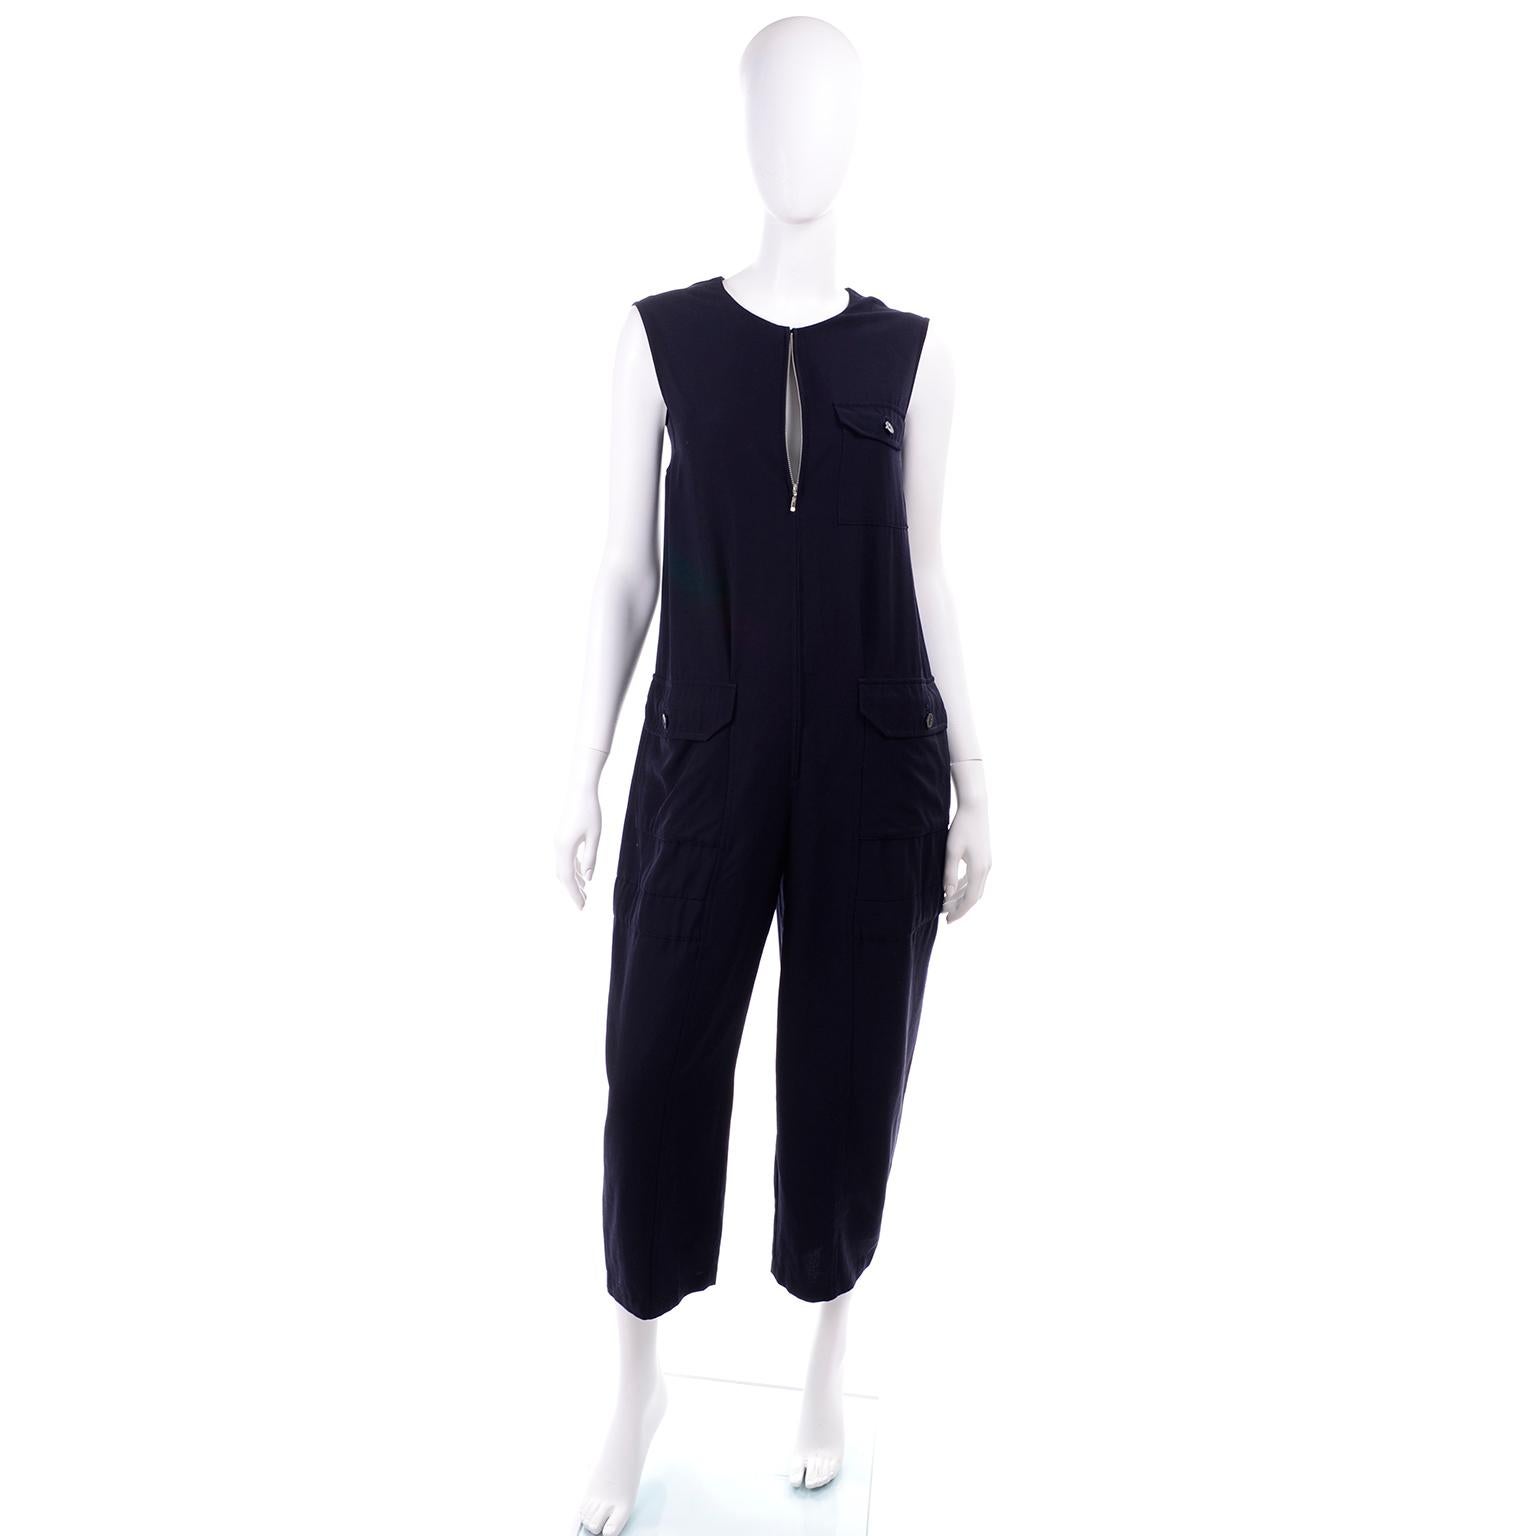 This is a versatile 1990s navy wool sleeveless utility jumpsuit designed by Yohji Yamamoto.  The jumpsuit closes in front with a CF zipper, and has 3 pockets; 1 patch pocket at the breast, and 2 side seam slit pockets underneath 2 hip patch pockets.